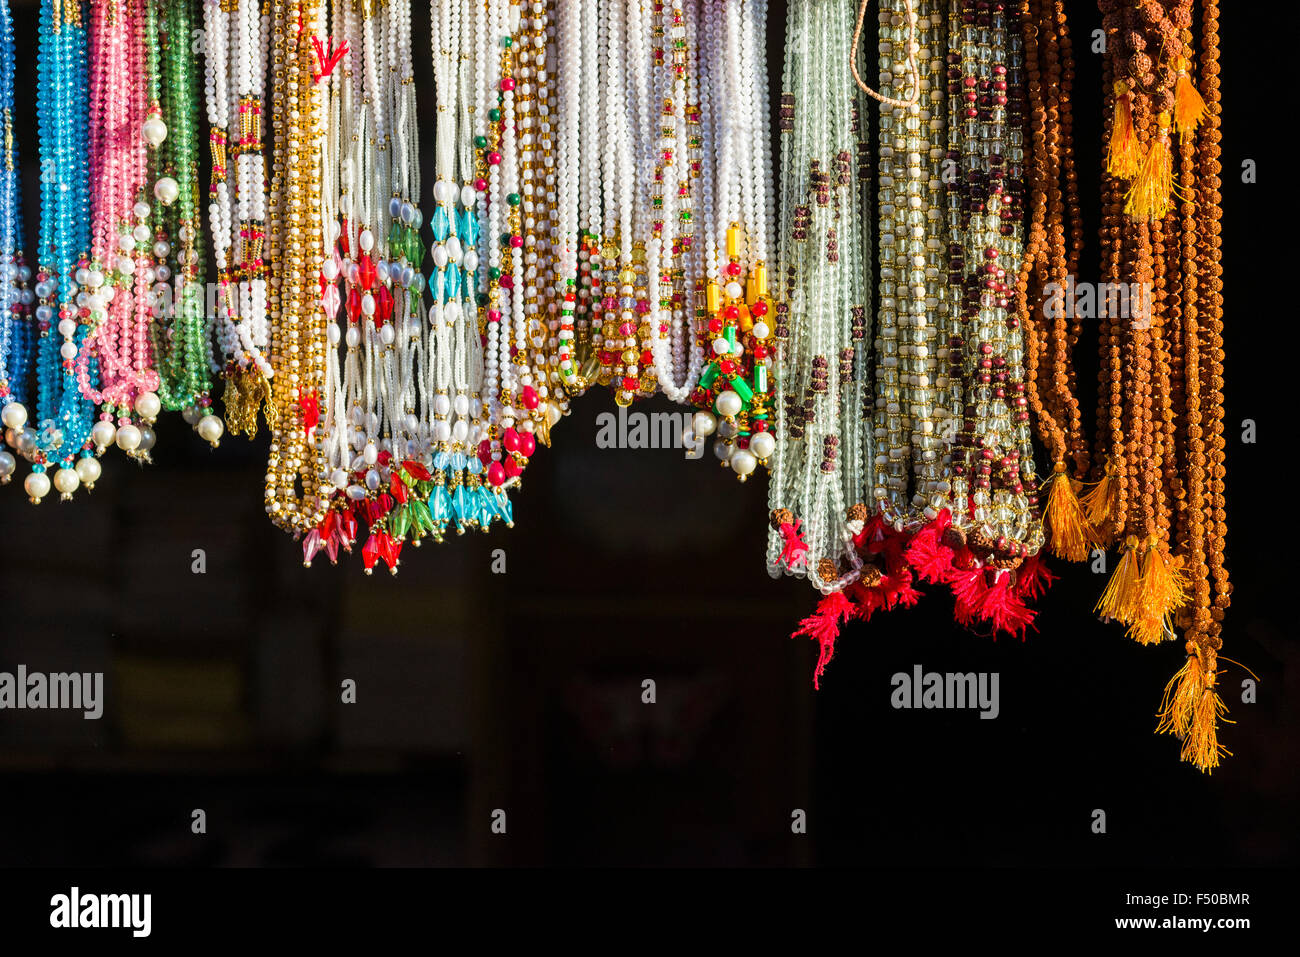 Necklaces, Malas, are sold for religious ceremonies at the banks of the river Ganges Stock Photo